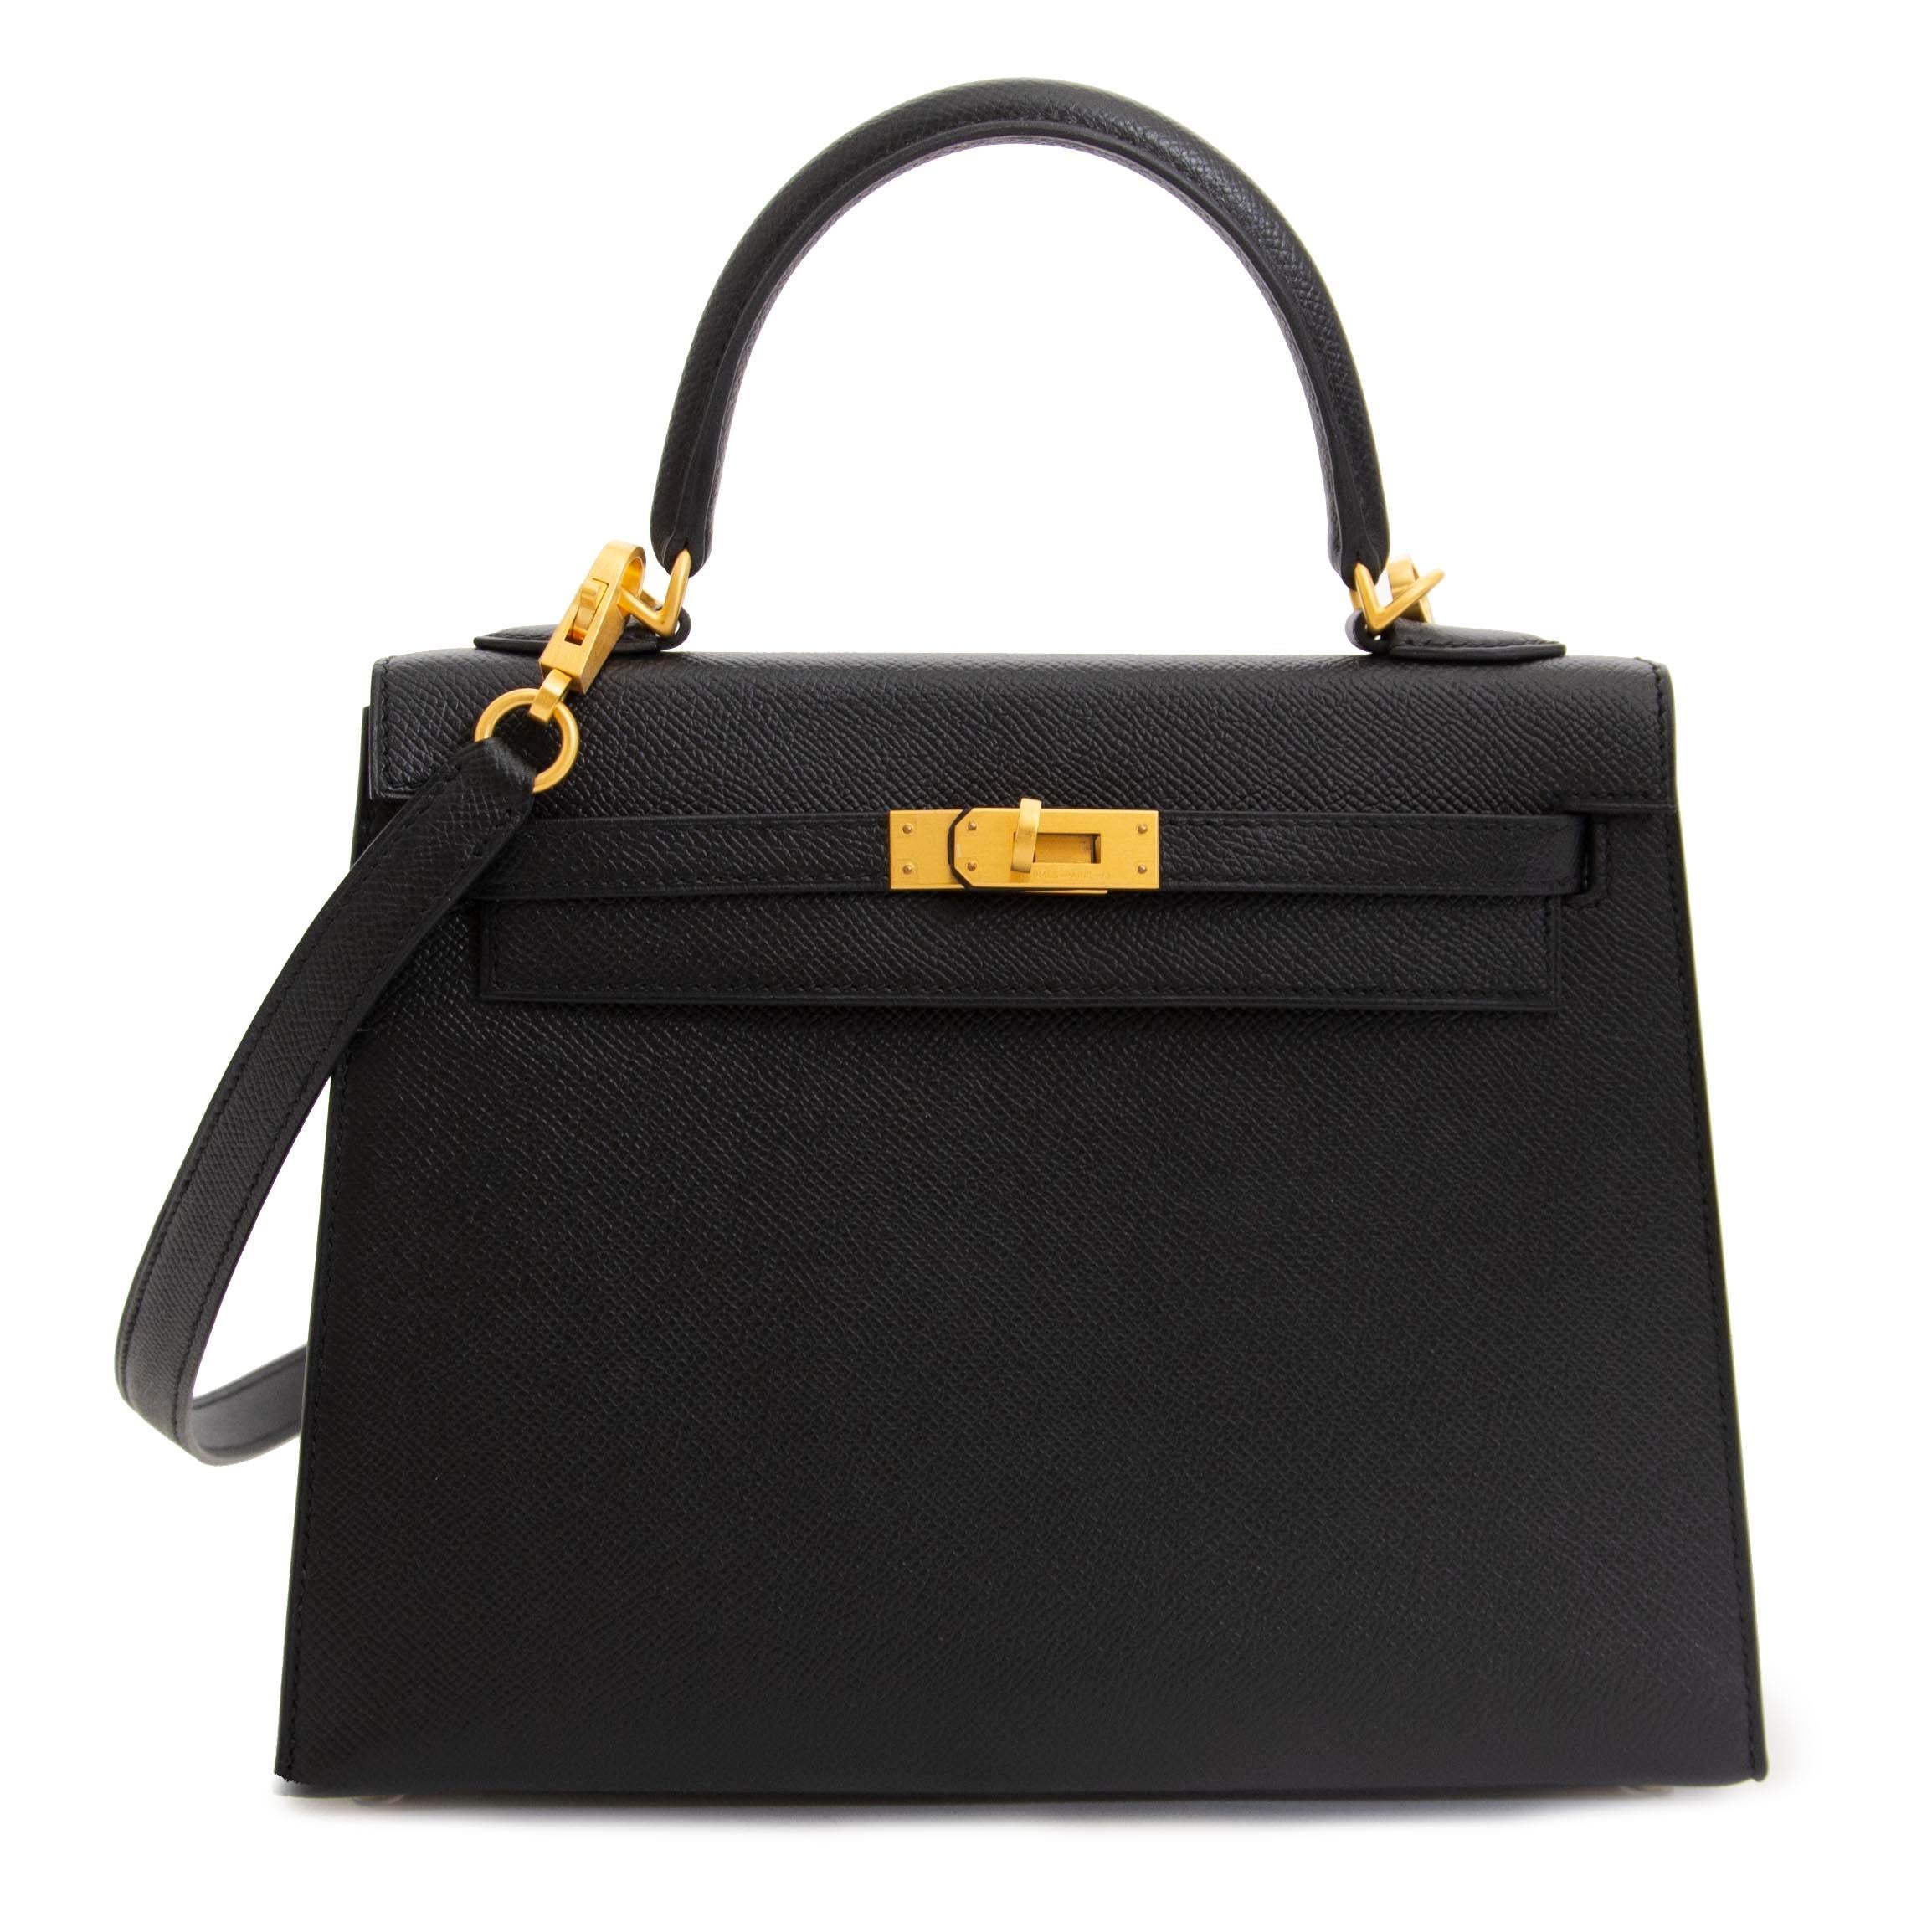 This gorgeous Hermès Kelly is a special order, making this a highly exclusive and unique bag.

Hermès makes custom made 'special order' bags that are entirely tailor made to the personal taste of a privileged client. They are identifiable by their